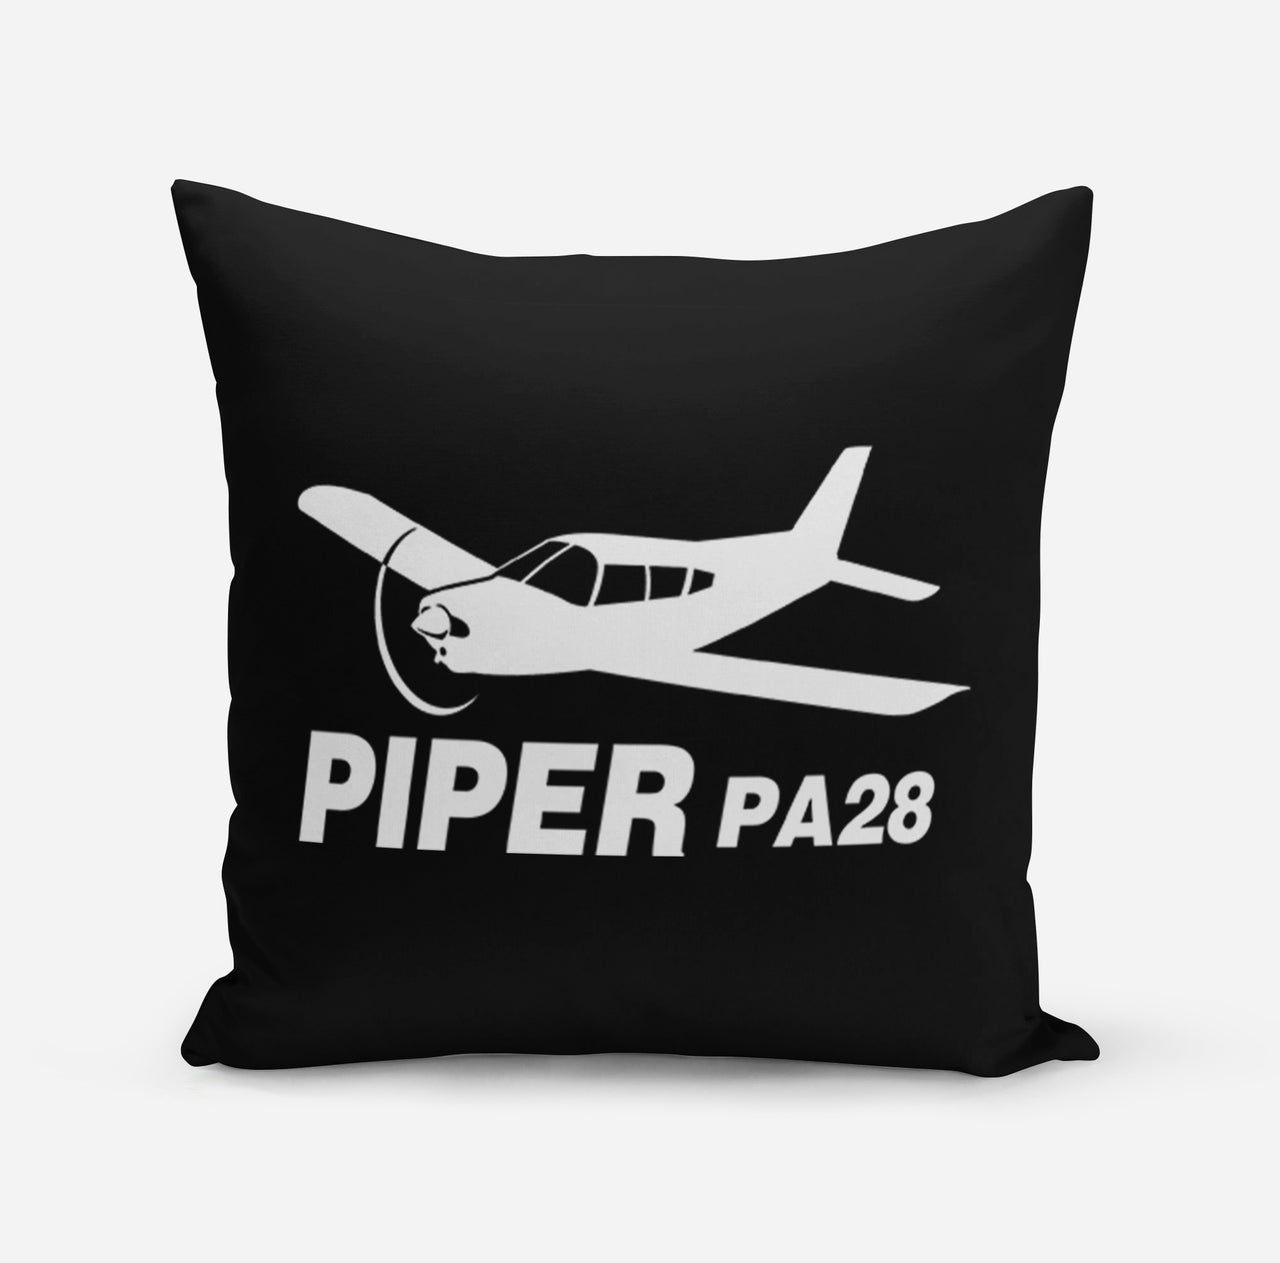 The Piper PA28 Designed Pillows